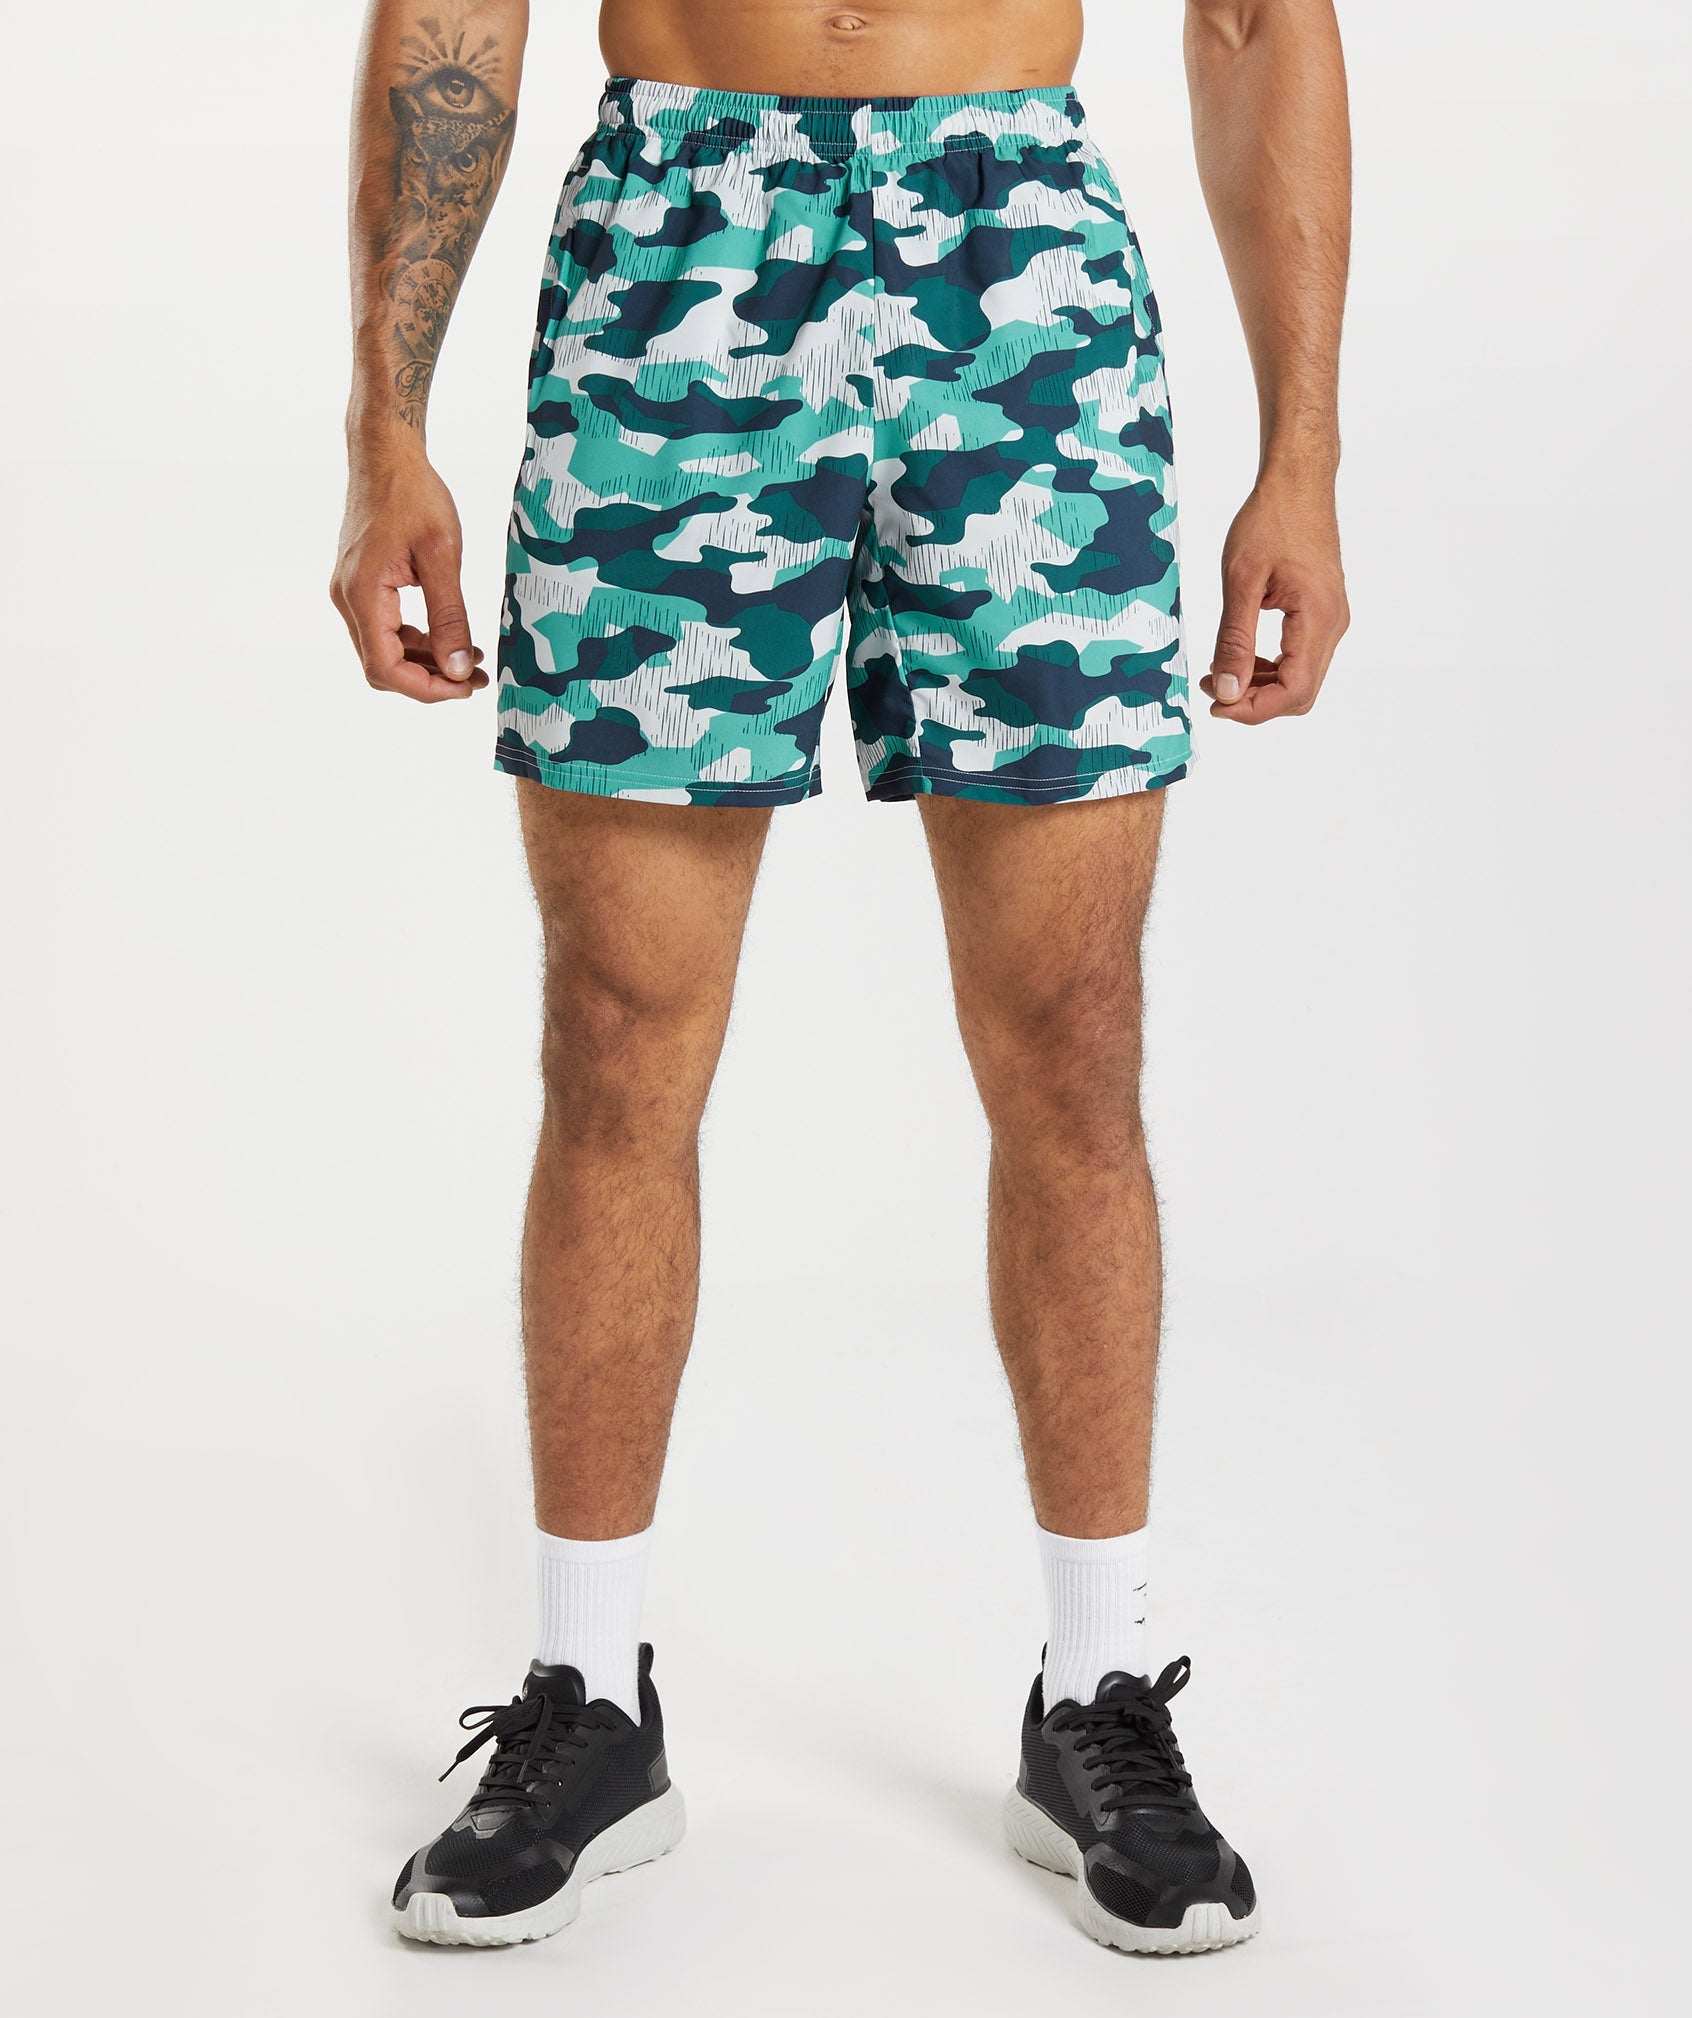 Arrival 7" Short in Fauna Teal Print - view 1